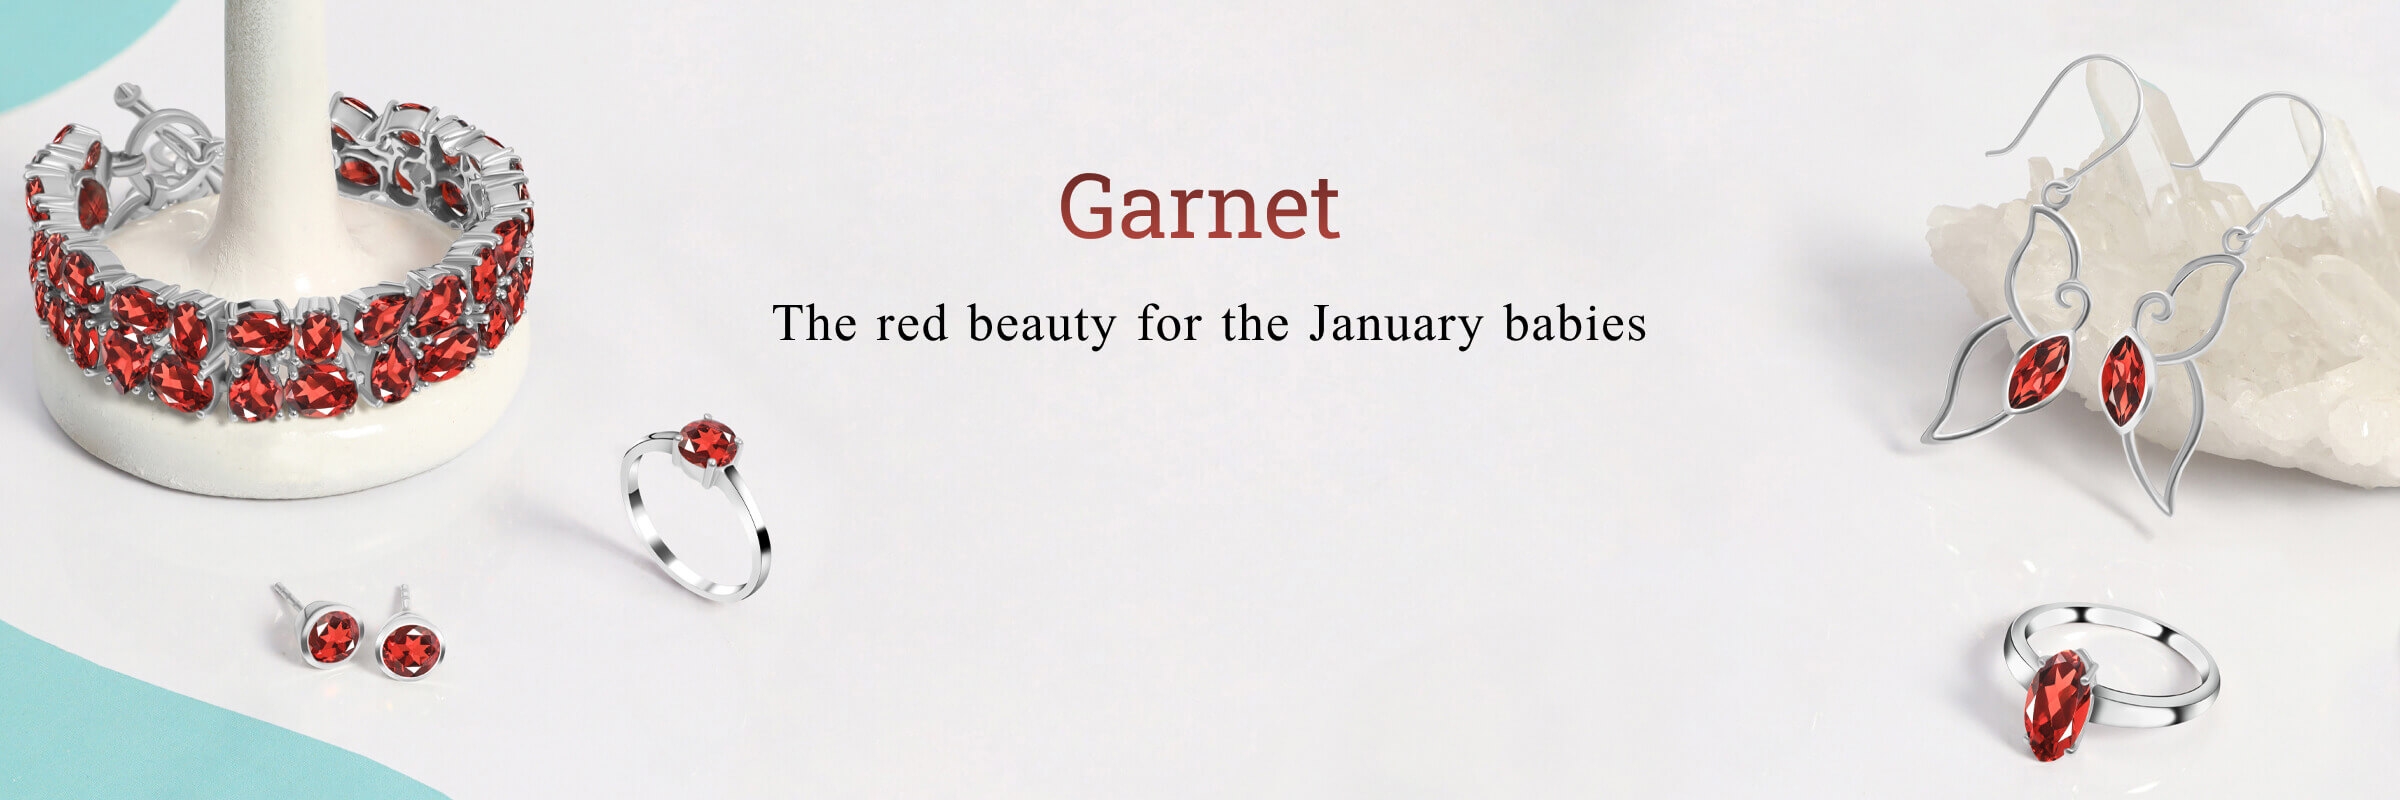 Garnet - The red beauty for the January babies